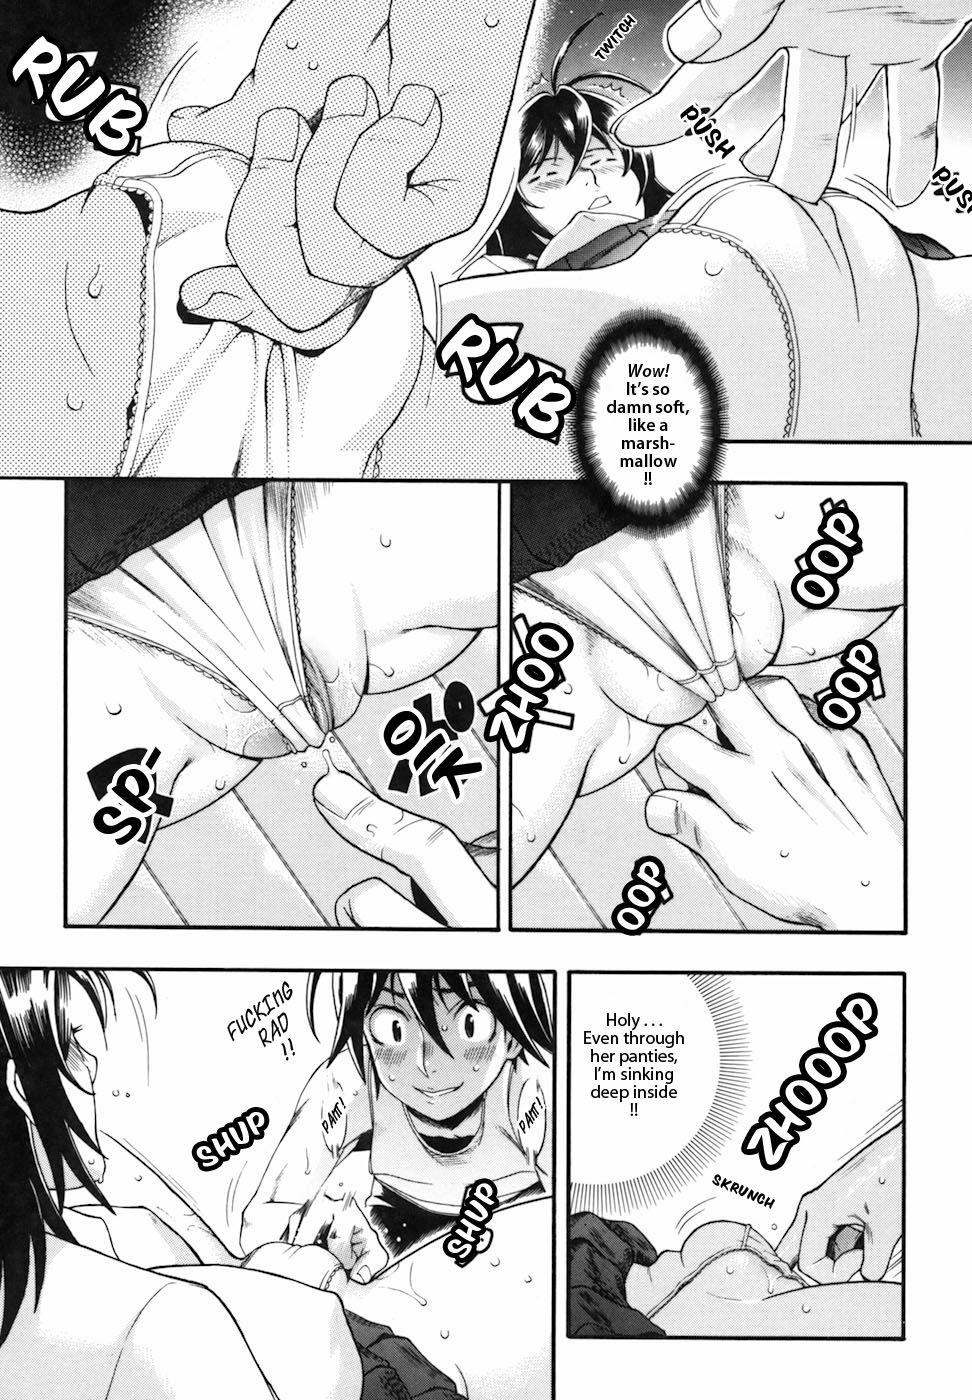 Perfect Body Candy Girl Jap - Page 11